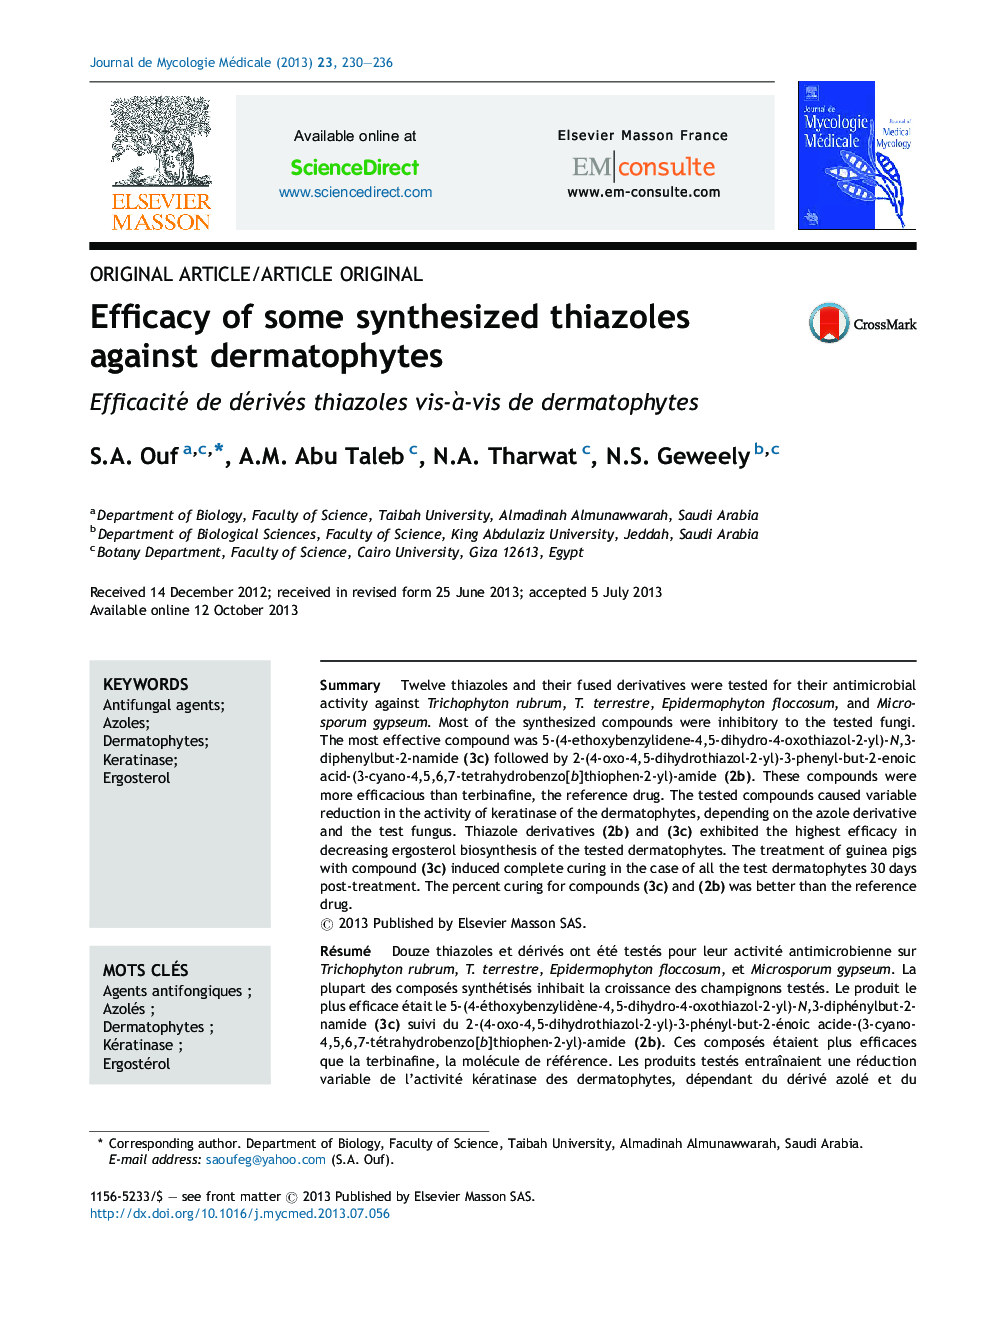 Efficacy of some synthesized thiazoles against dermatophytes